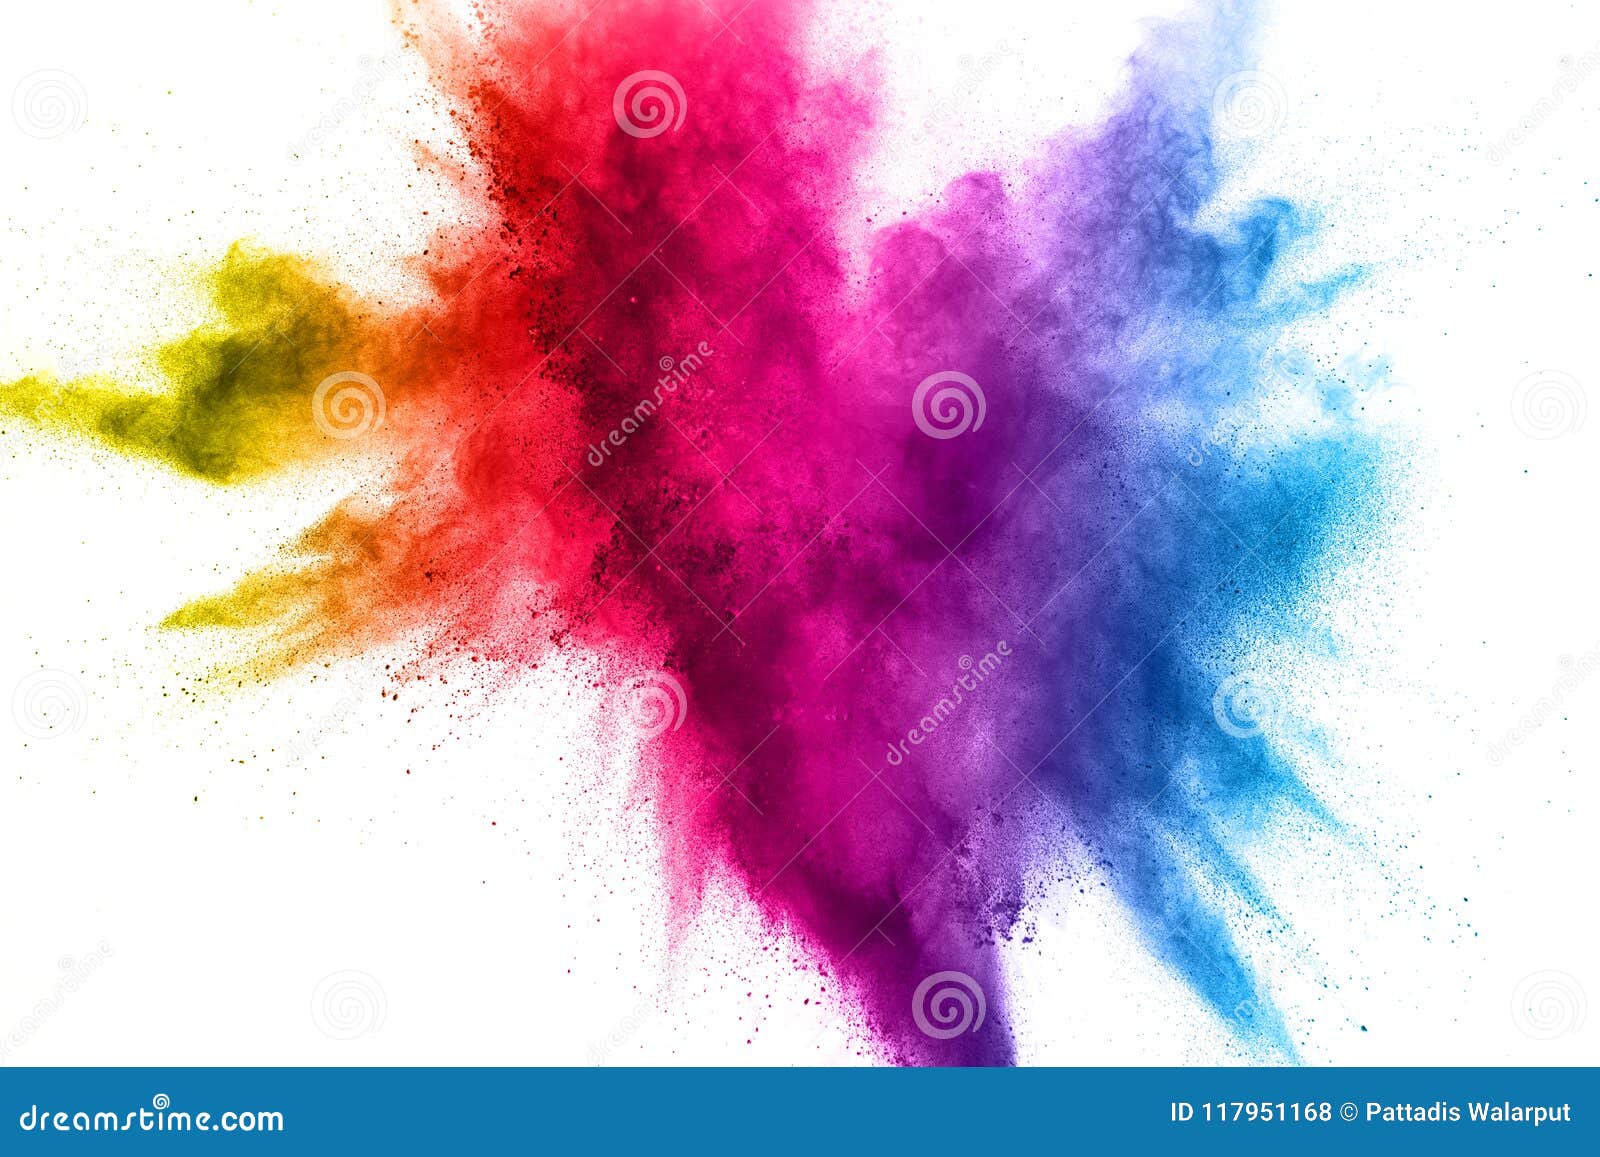 multi color powder explosion on white background.